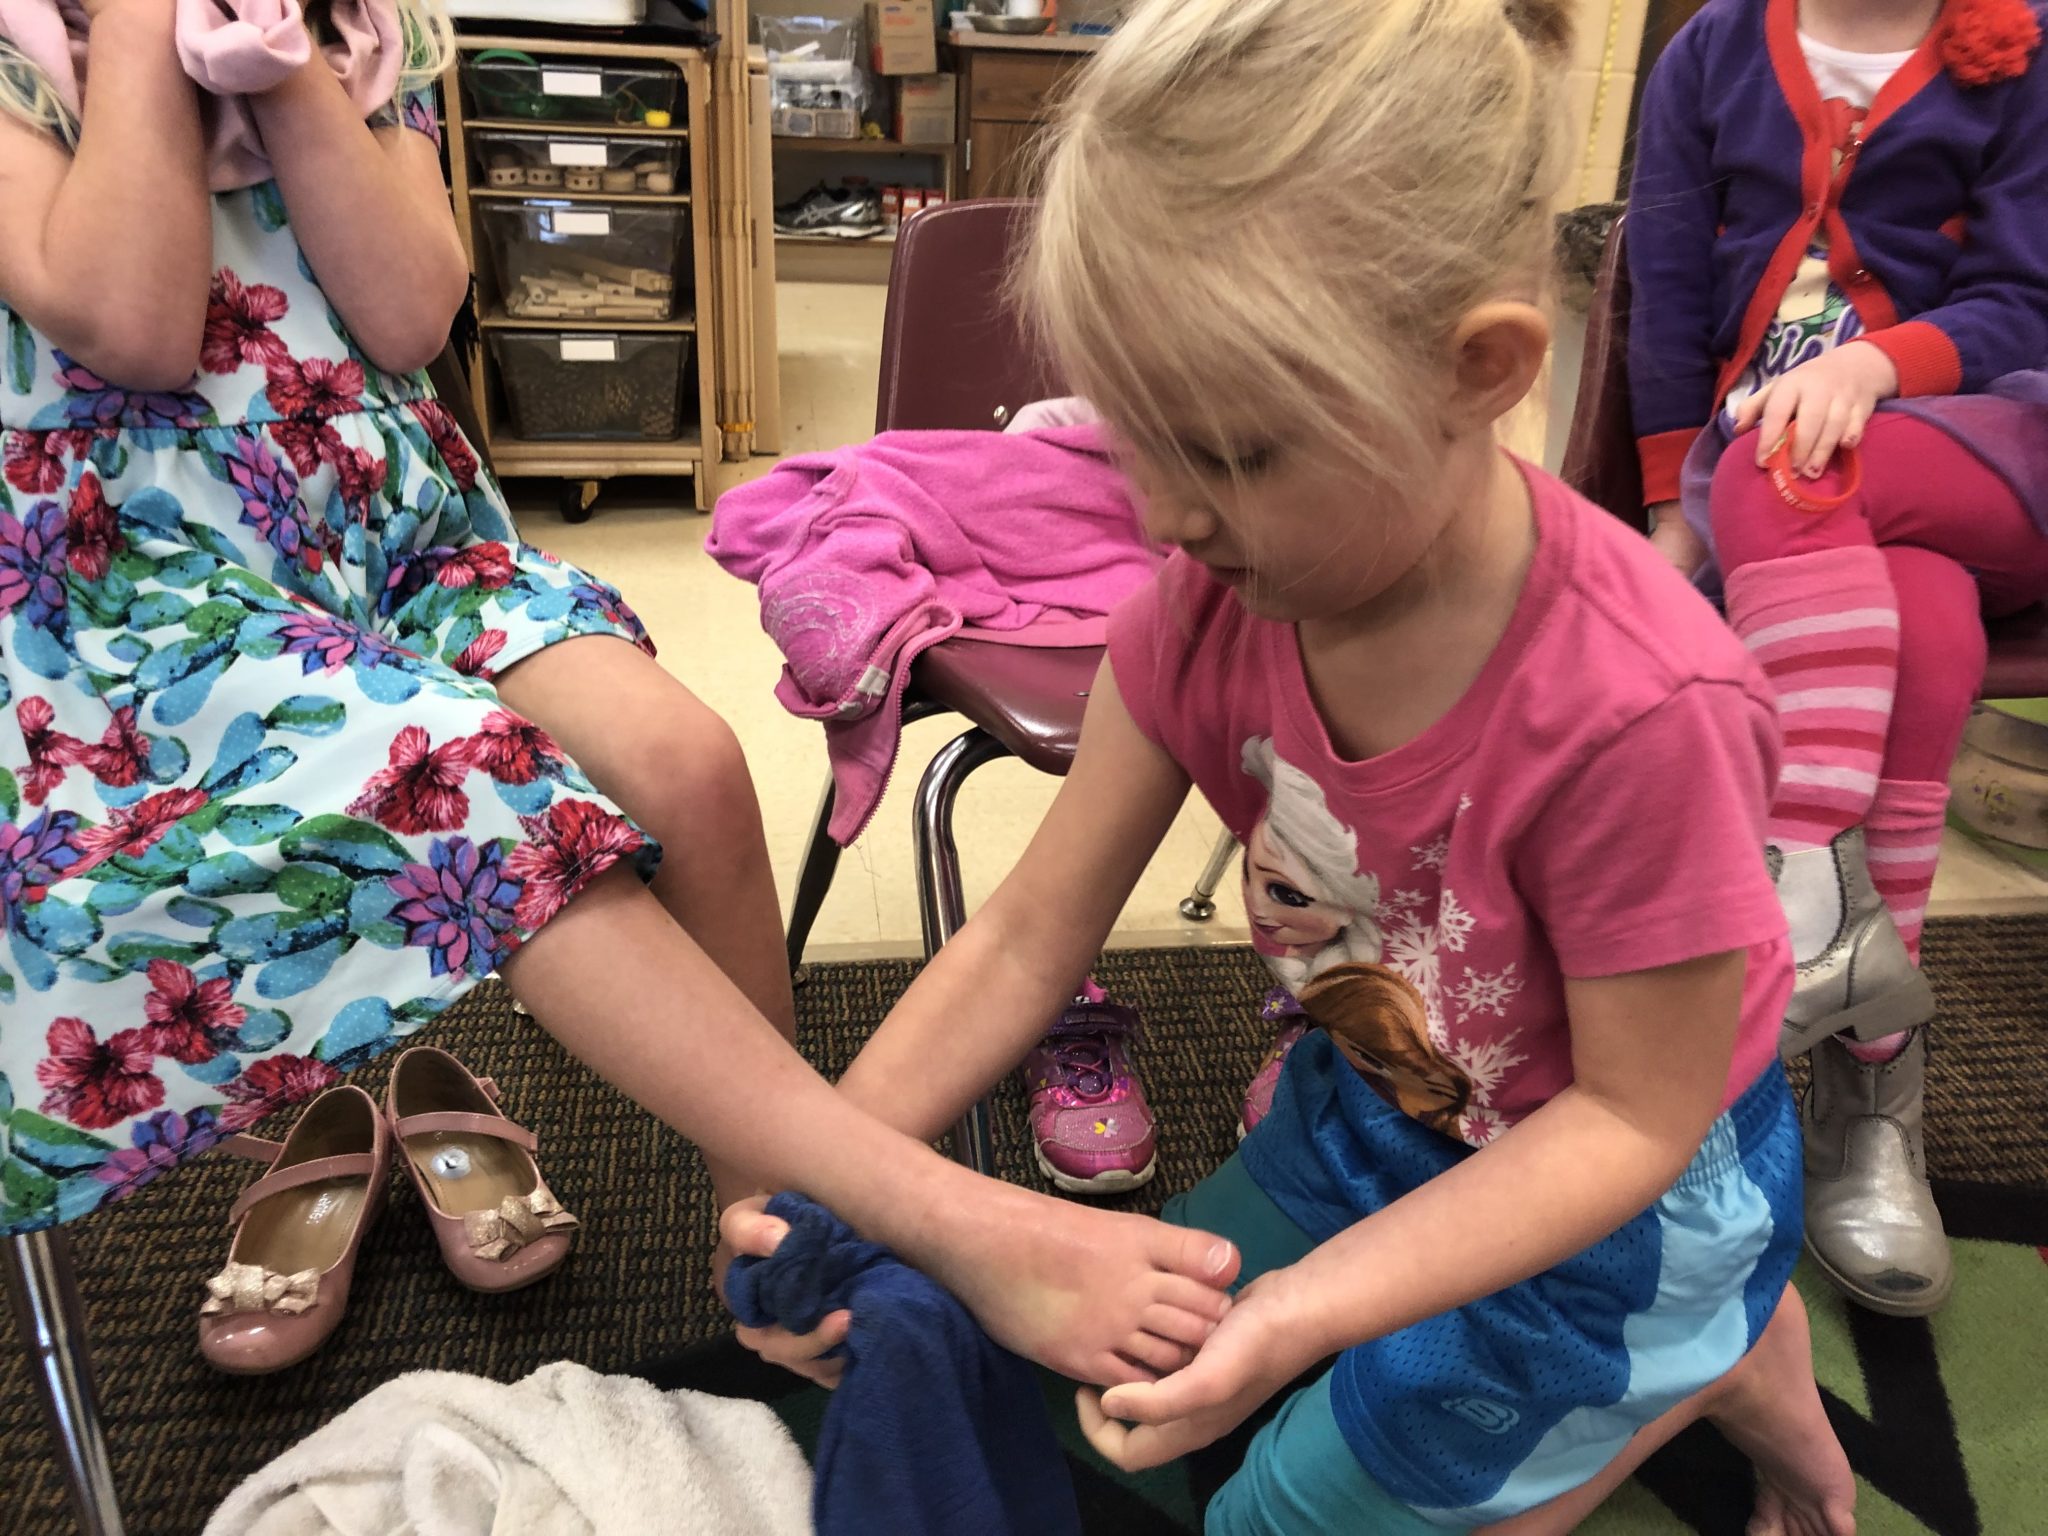 A preschool-age girl washes another girl's foot